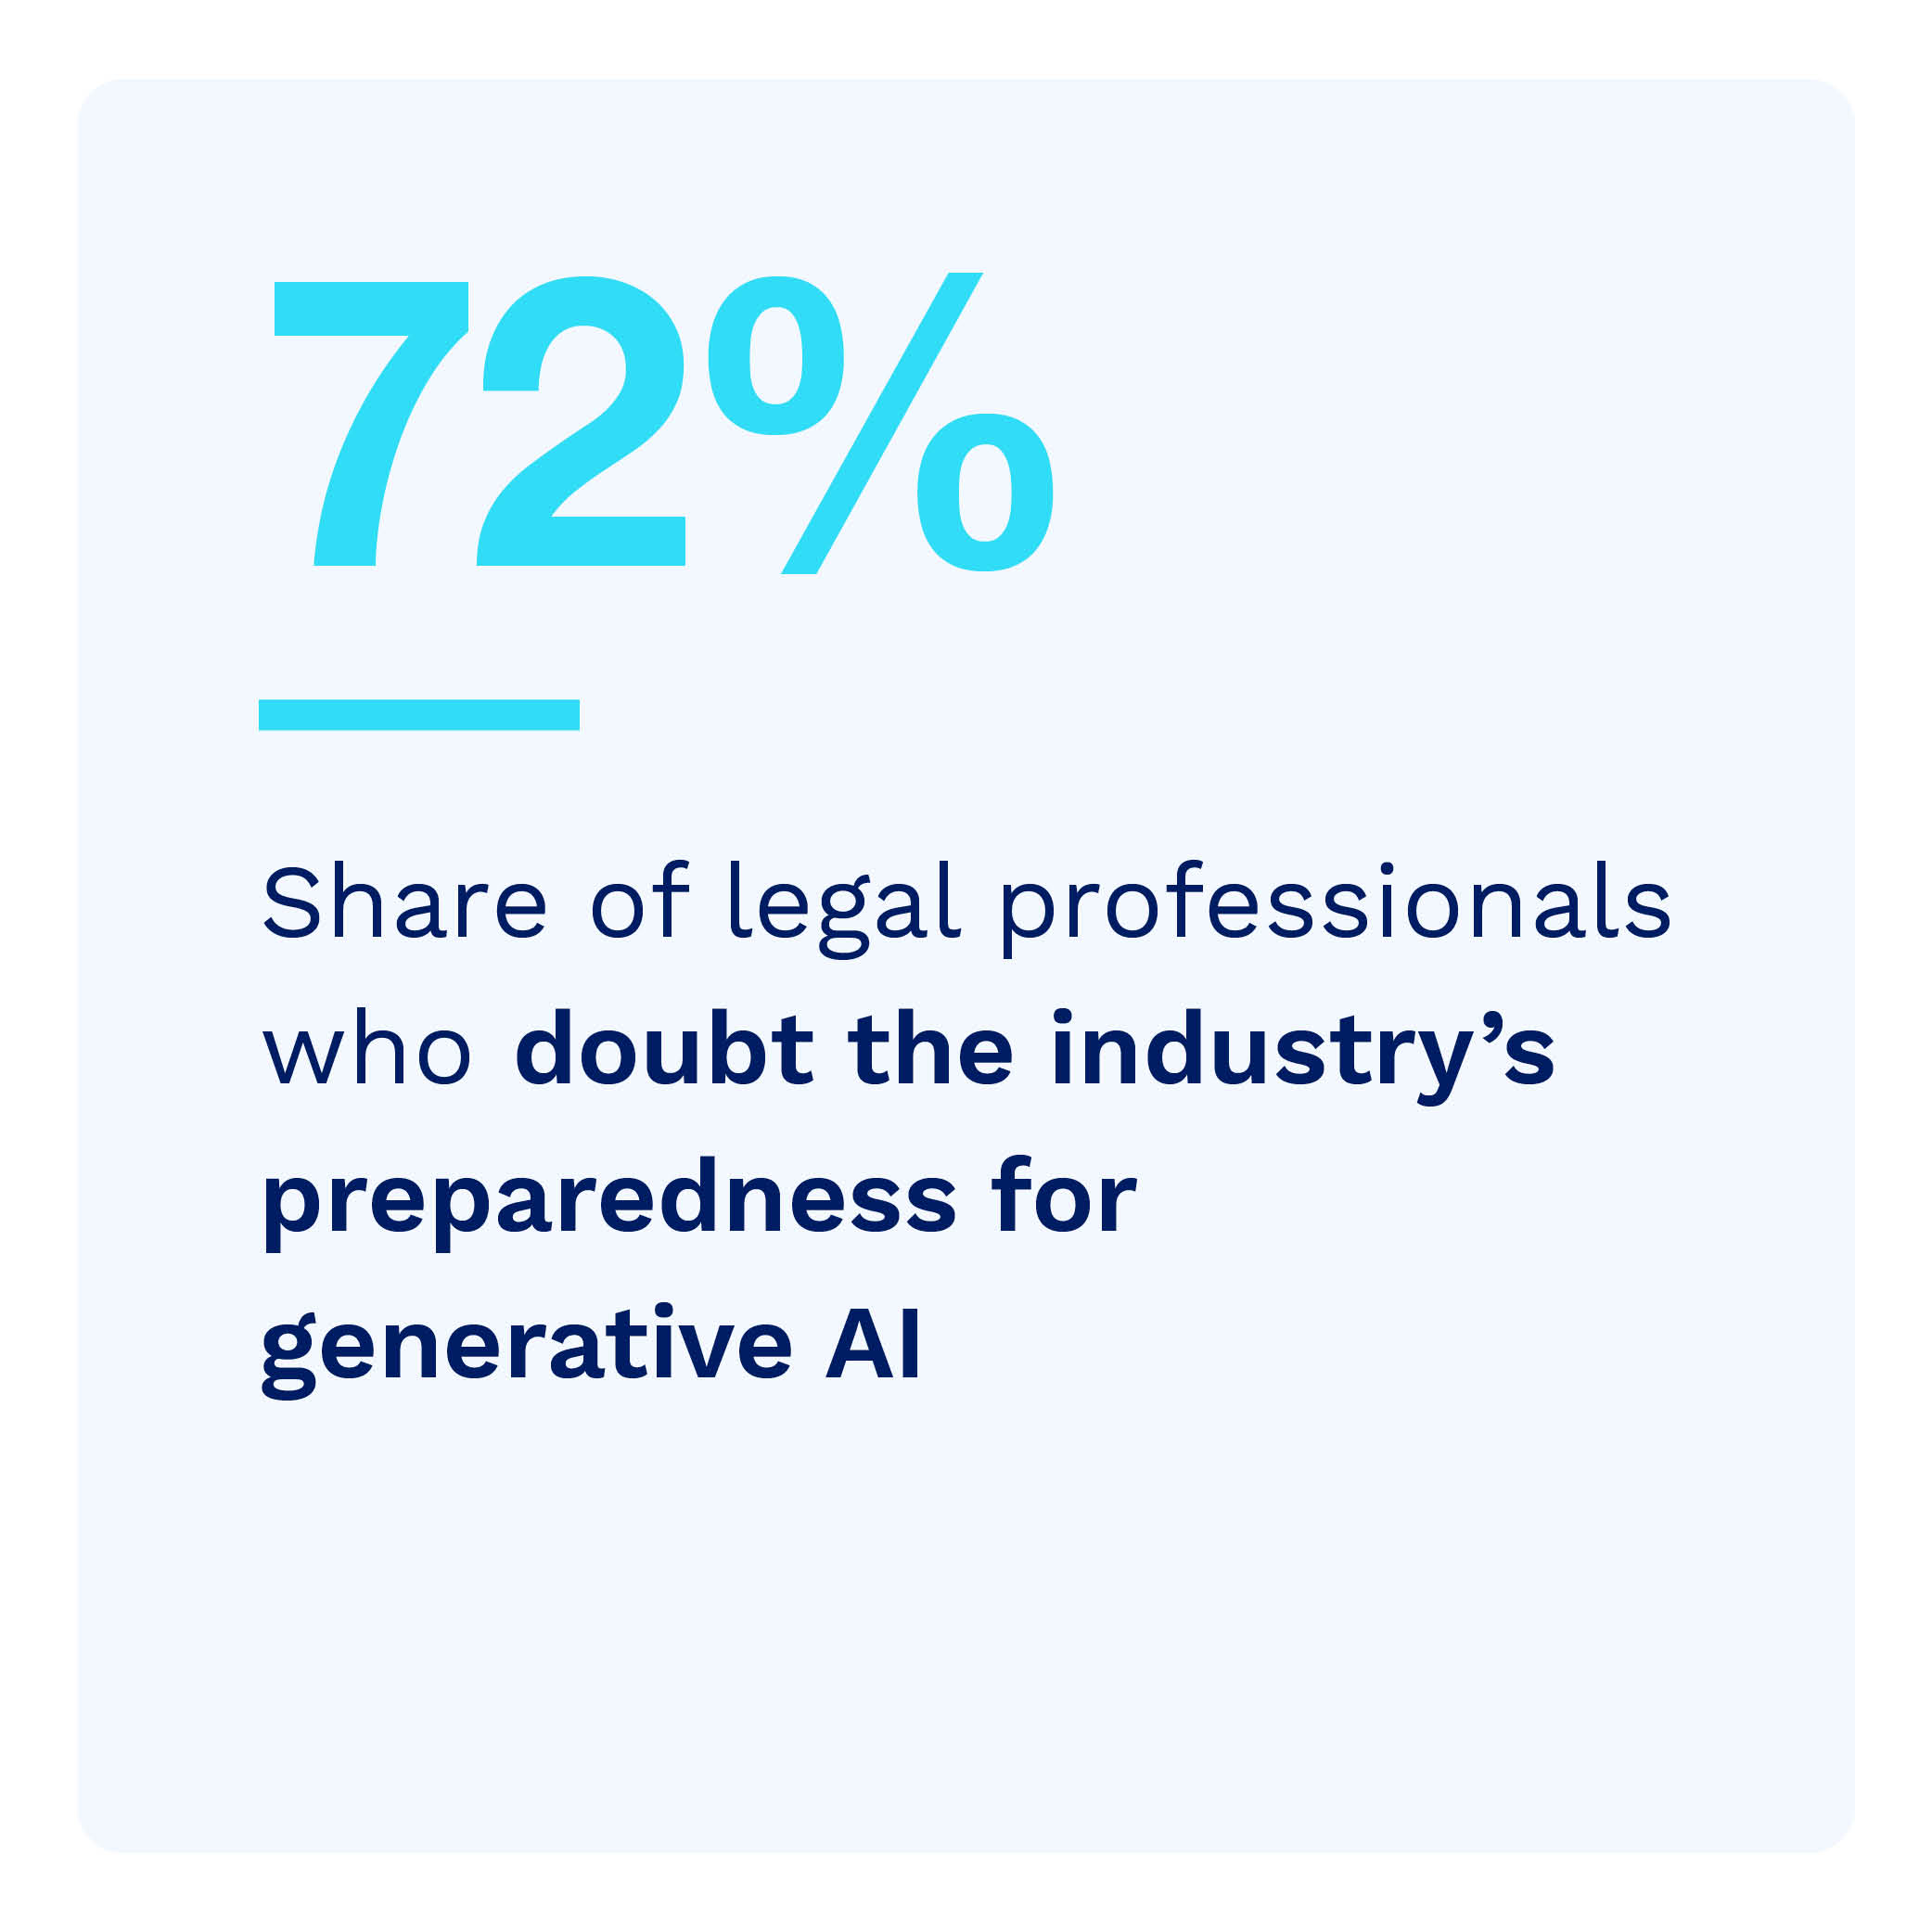 72%: Share of legal professionals who doubt the industry’s preparedness for generative AI